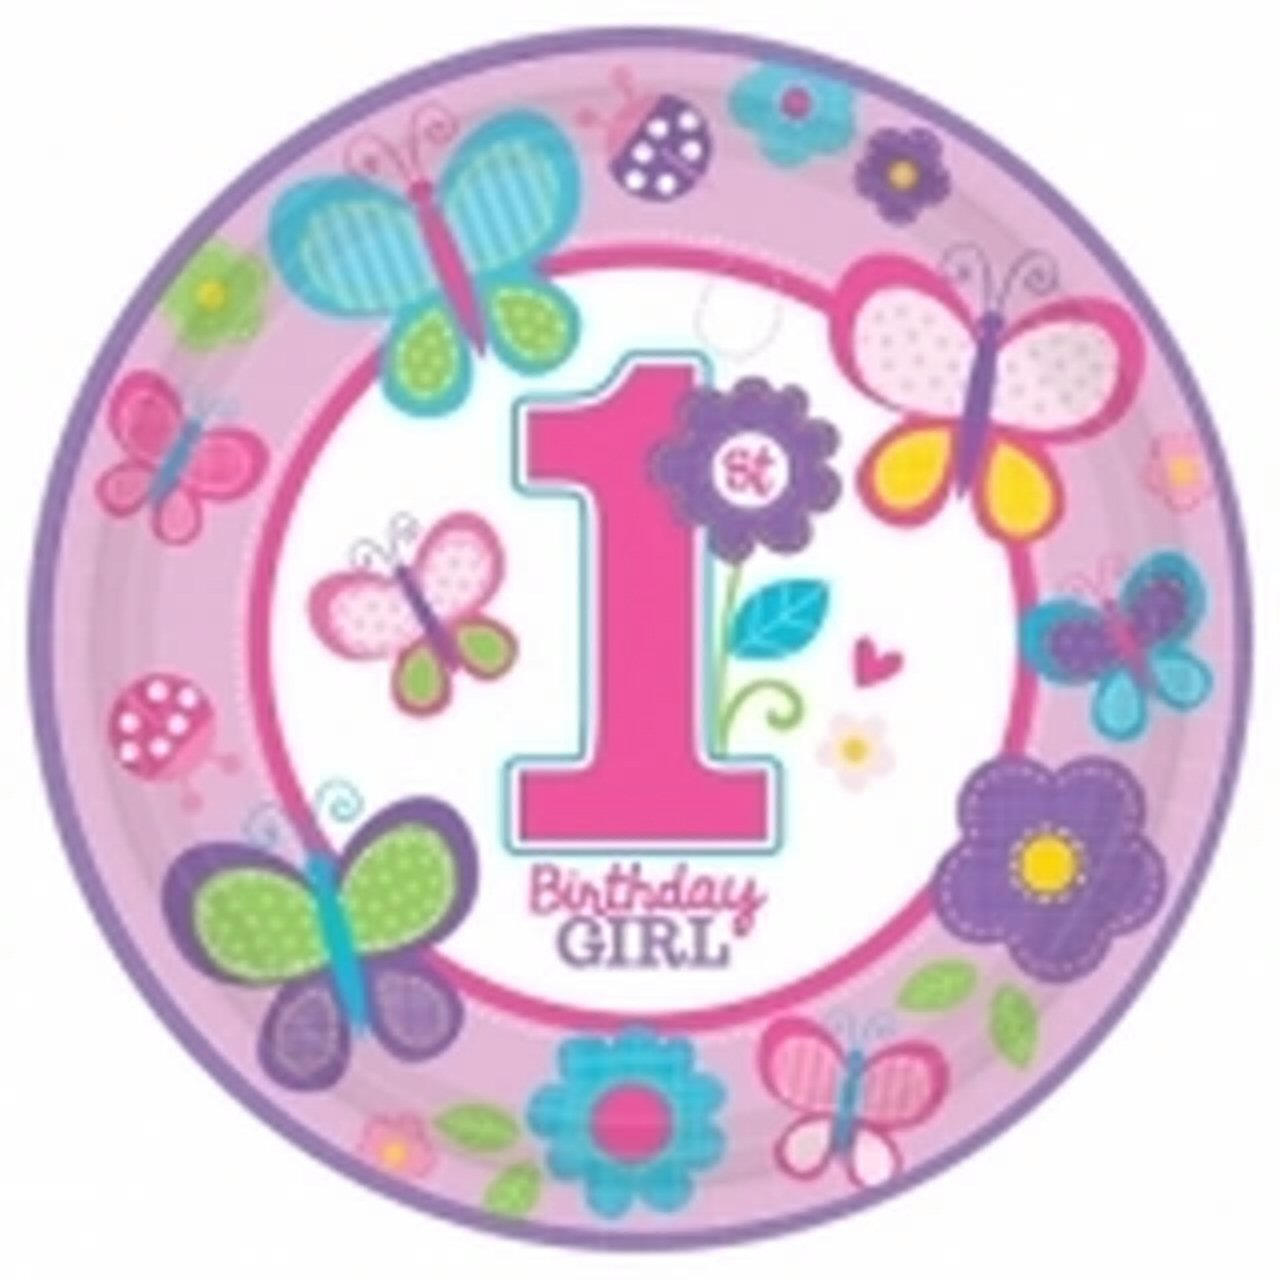 Sweet 1st Birthday Girl party paper plates